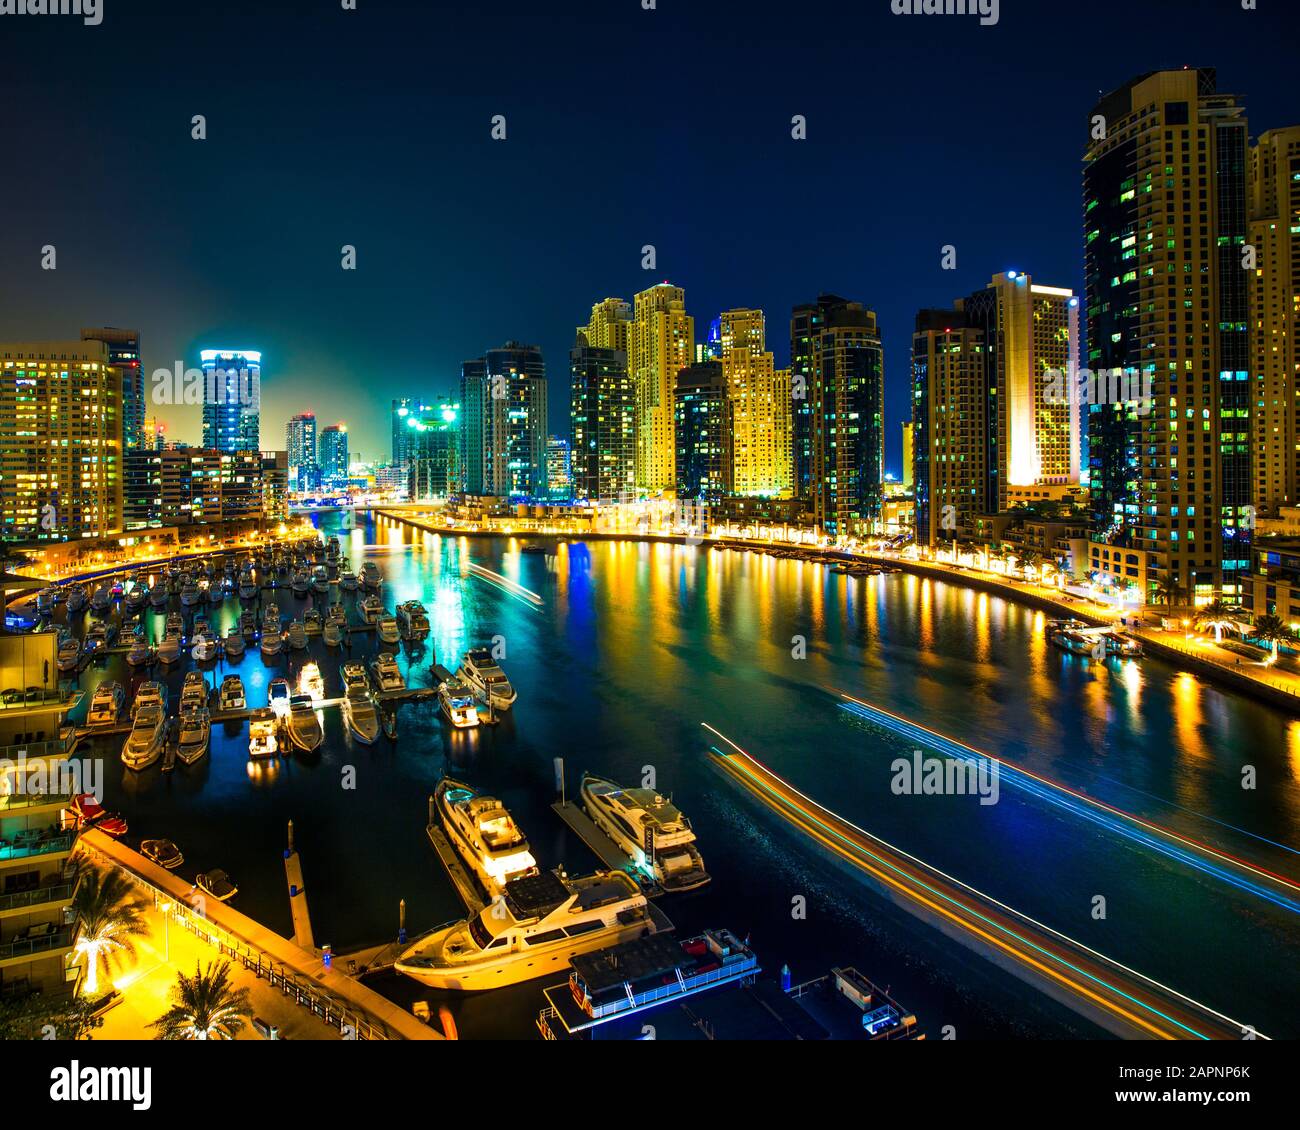 Night scene of city skyline and boats moored at harbour, Dubai Stock Photo